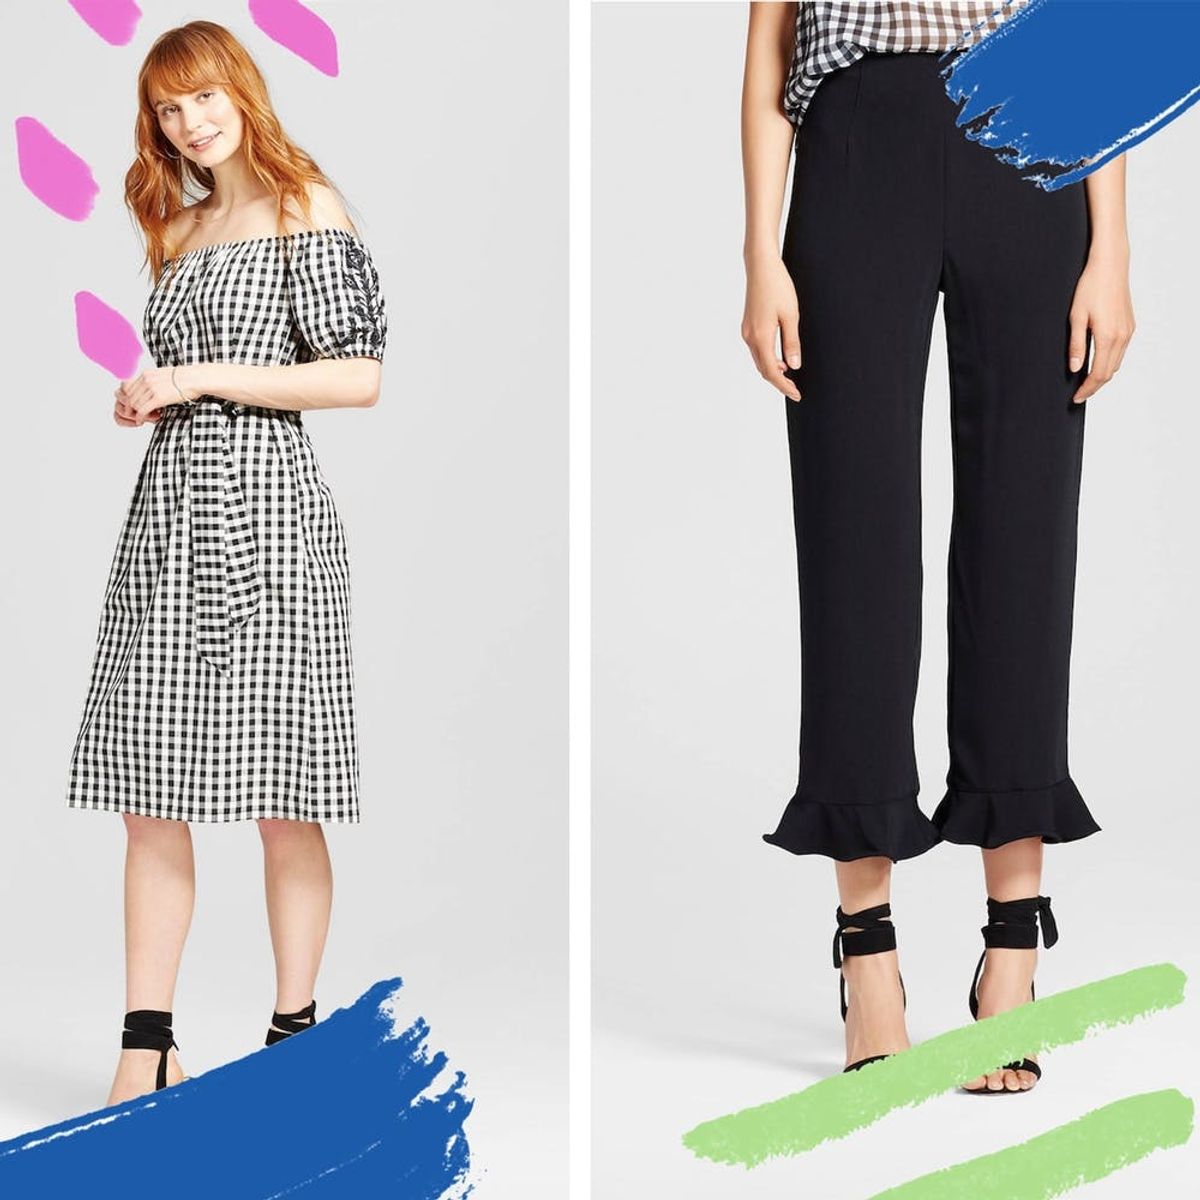 Our 6 Best Picks from Who What Wear’s New Target Summer Collection